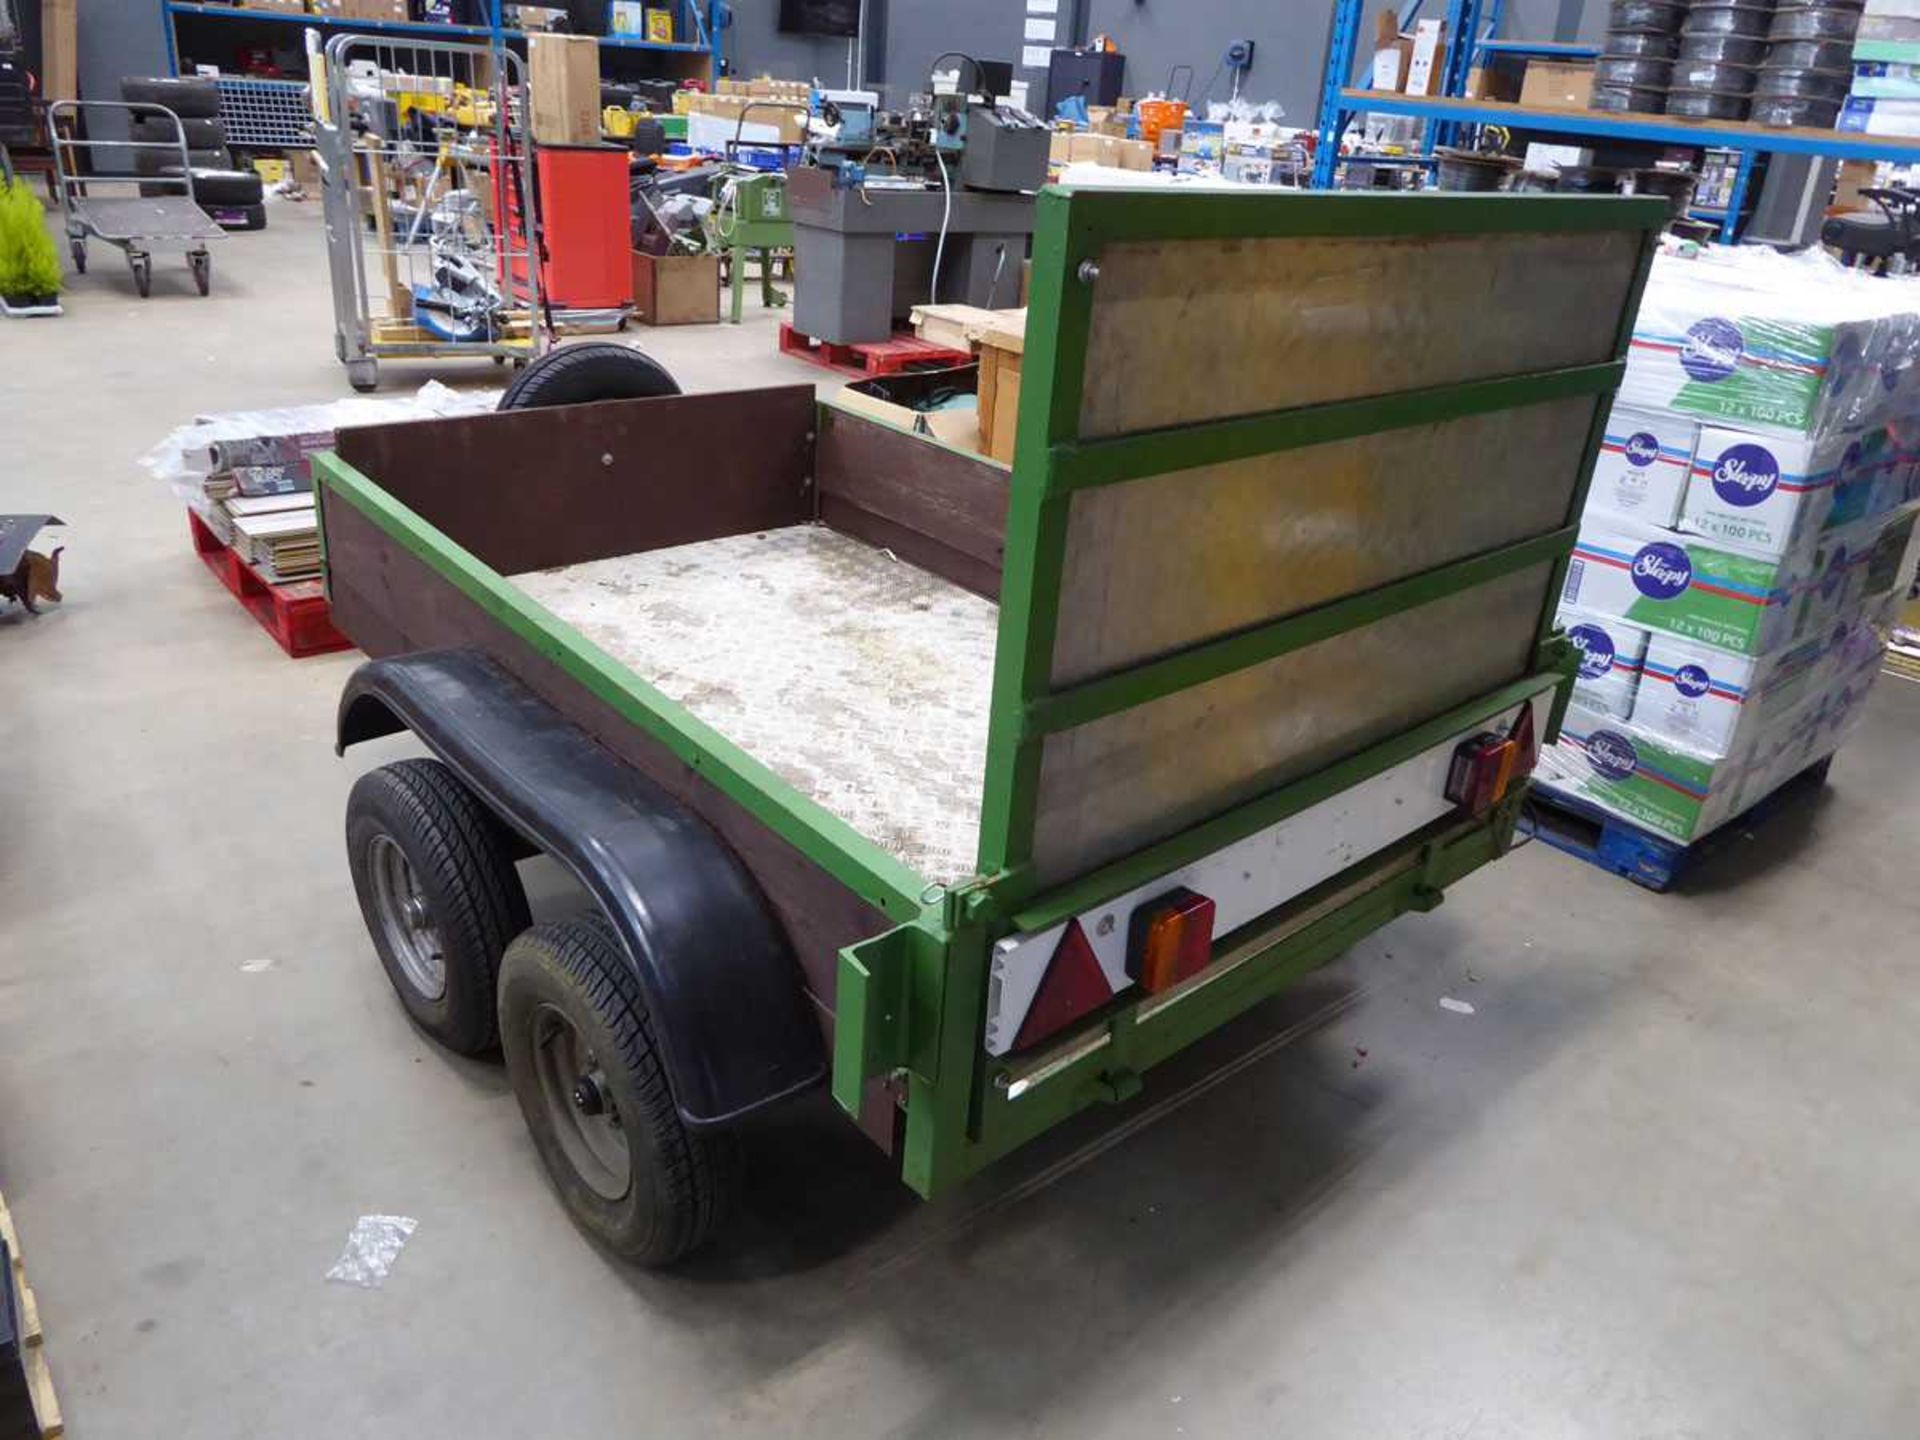 Double axle green metal and wood plant trailer with fold down backboard - Image 4 of 5